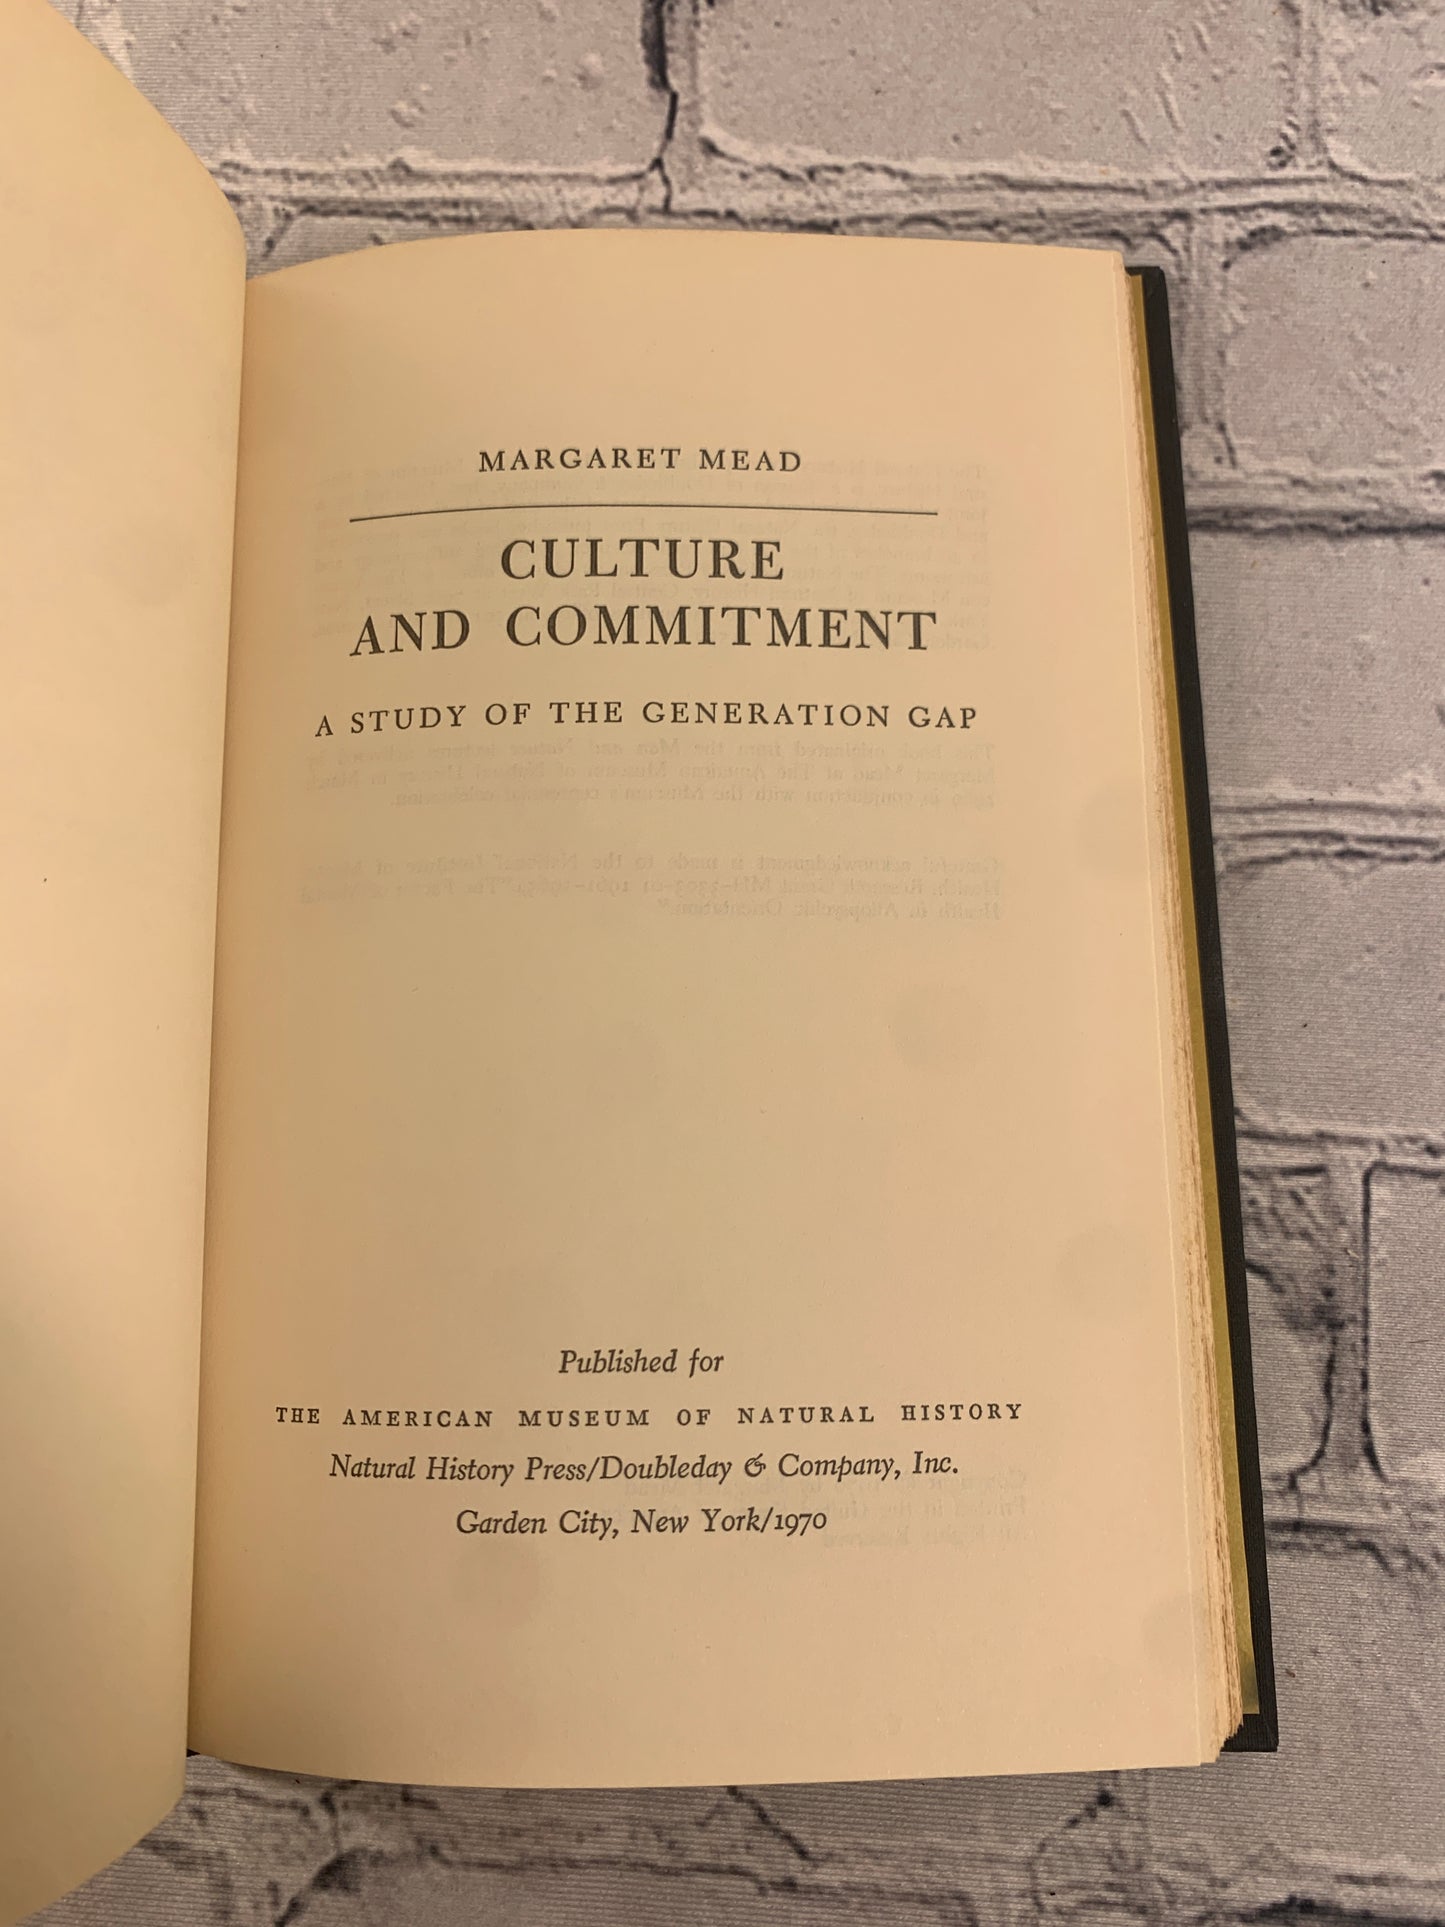 Culture and Commitment: A Study of the Generation Gap by Margaret Mead [1970]